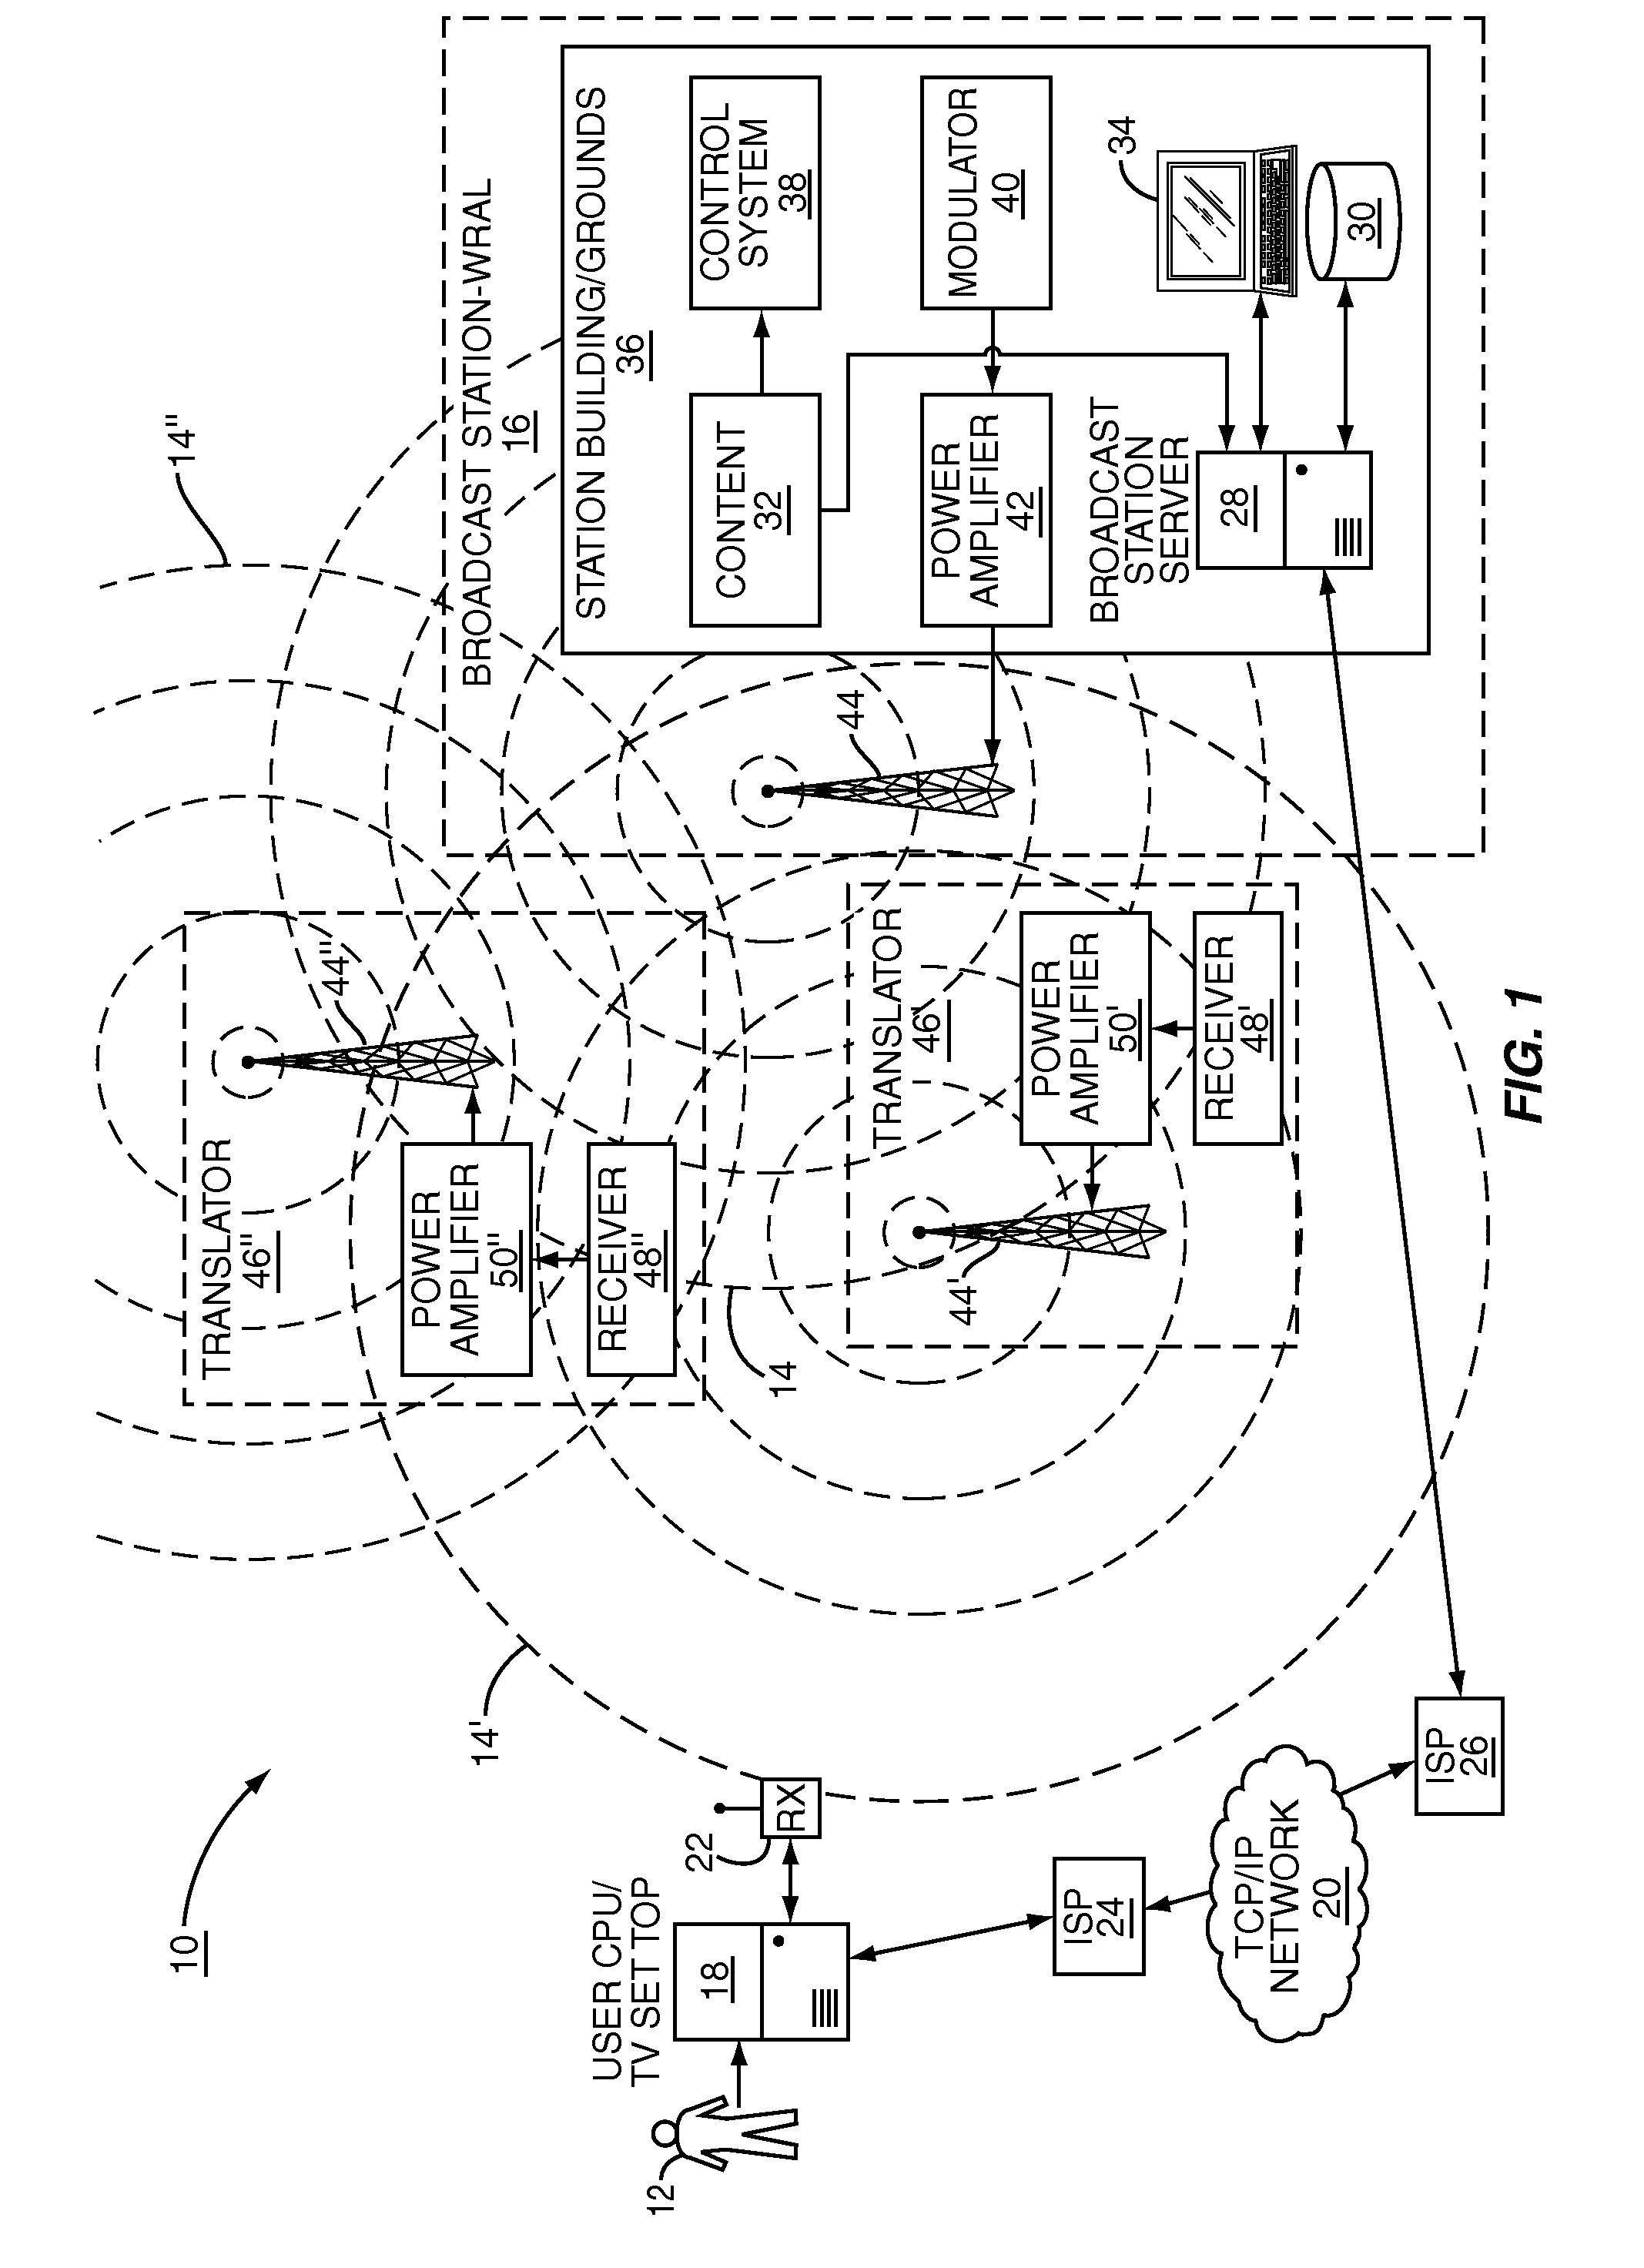 System and method for delivering geographically restricted content, such as over-air broadcast programming, to a recipient over a network, namely the internet